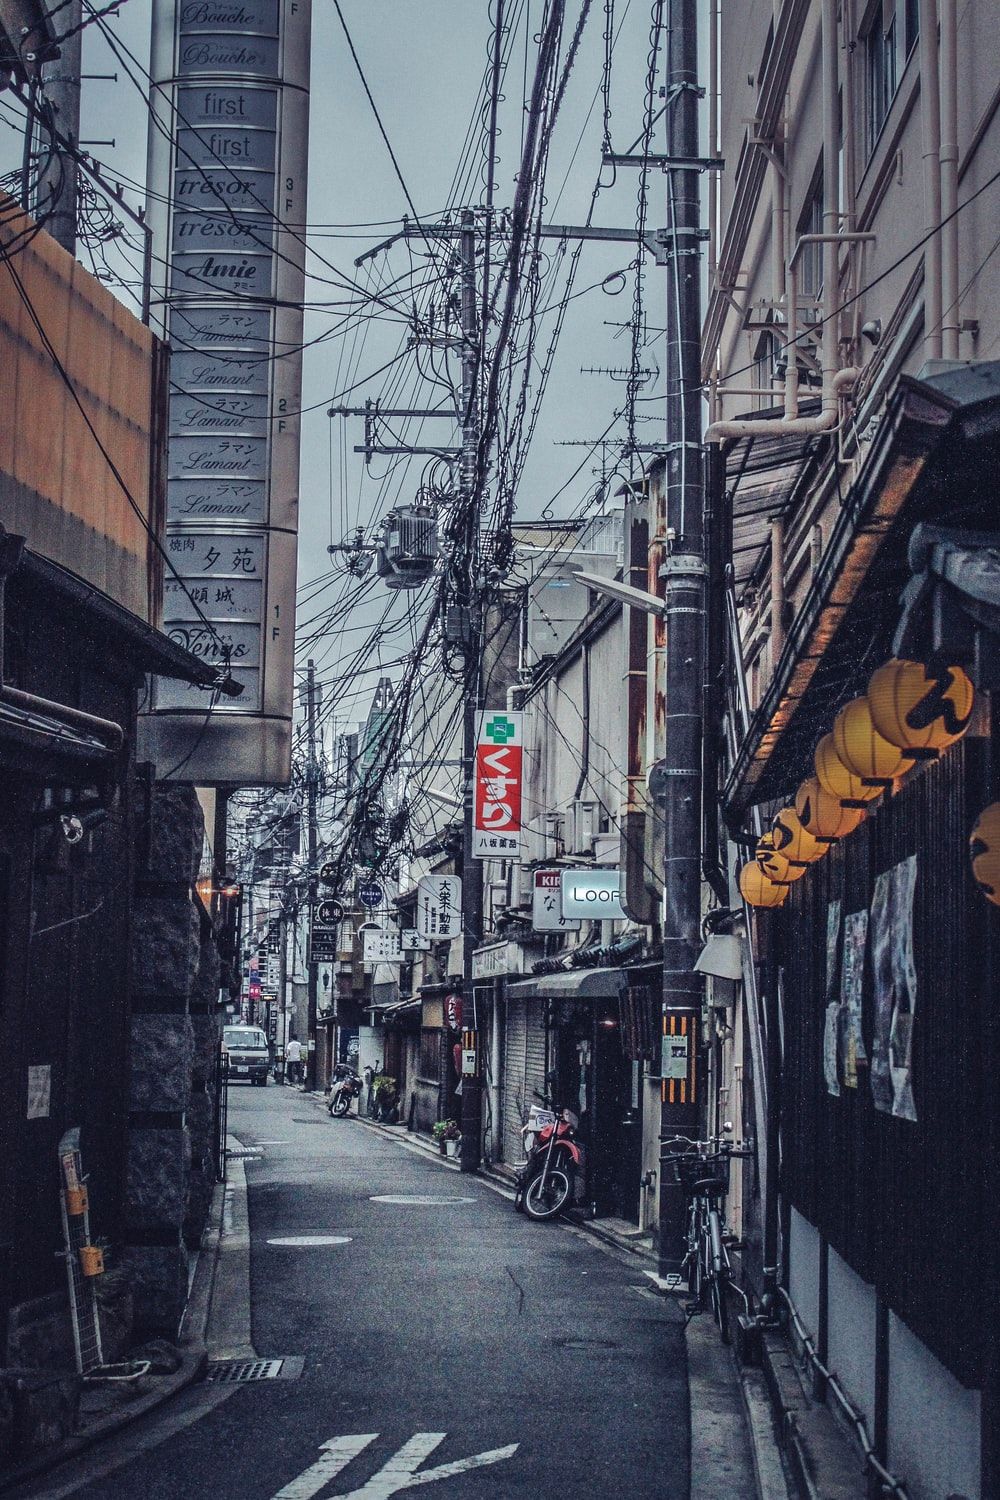 Japan Alley Picture. Download Free Image